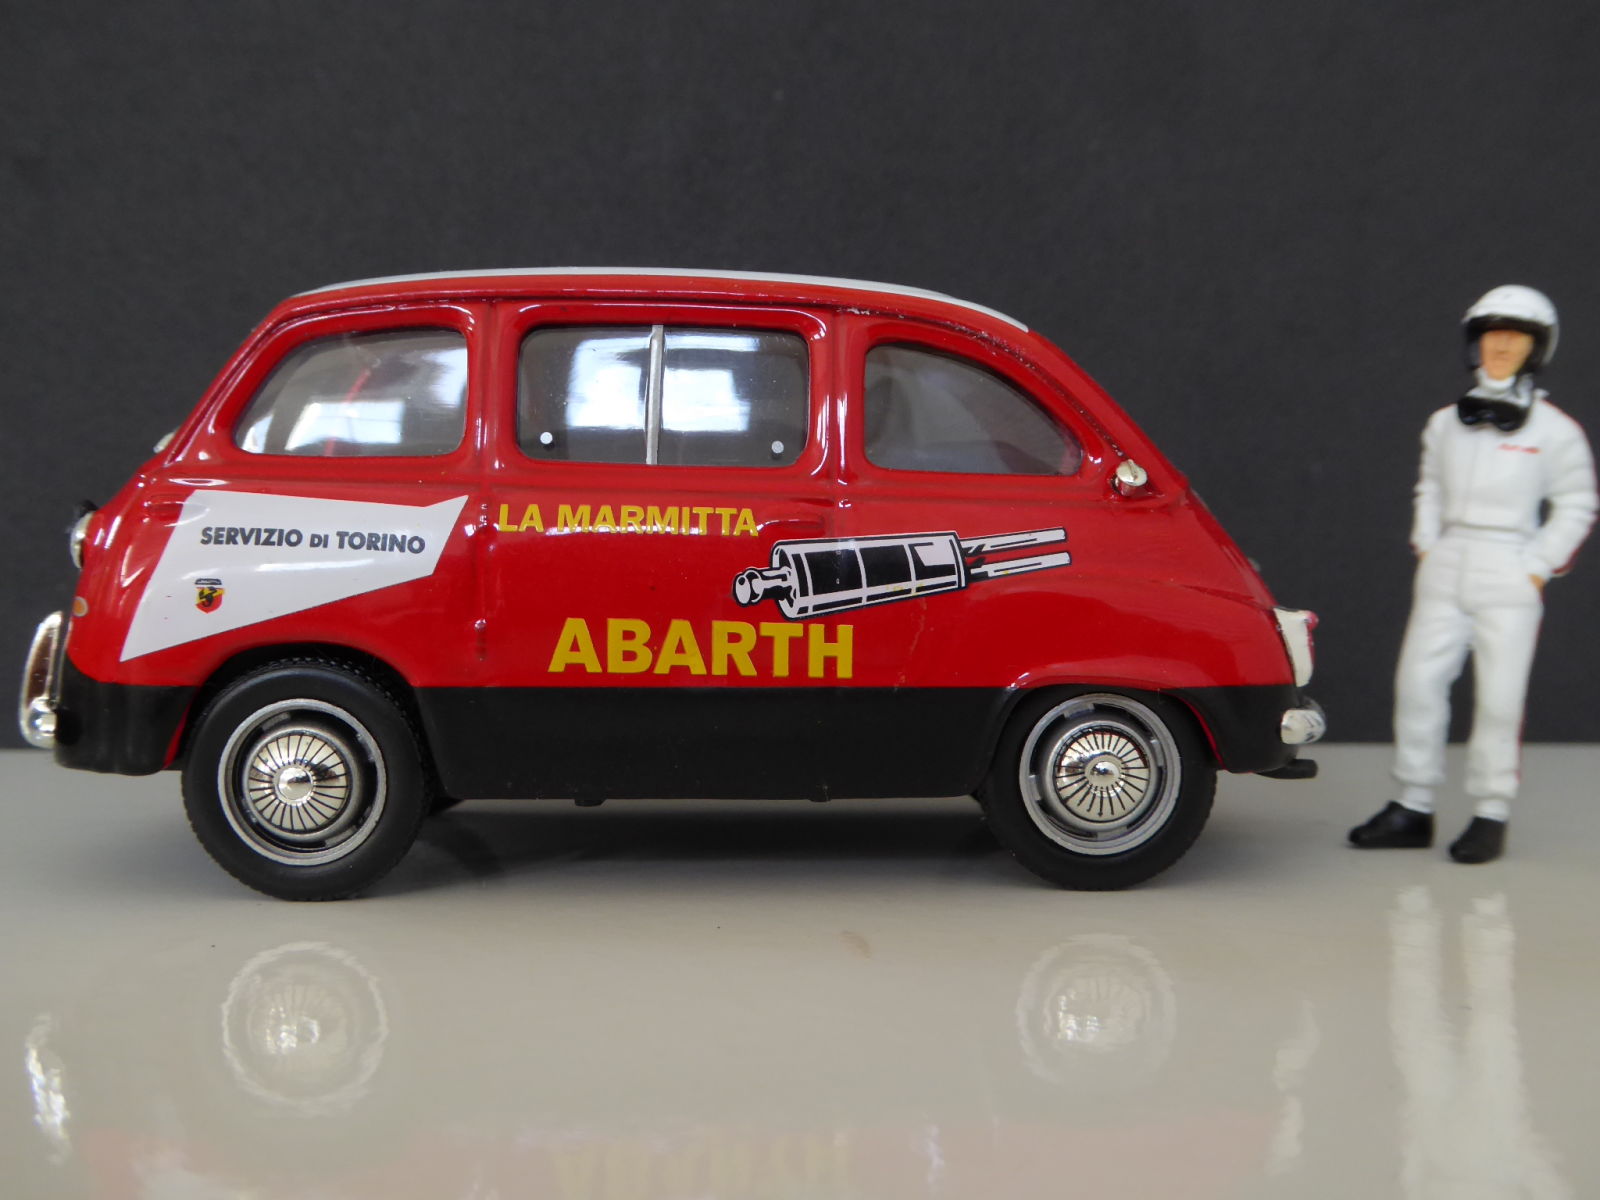 Illustration for article titled Forty 3rd: Abarth, Abarth, Abarth on Fiat Friday